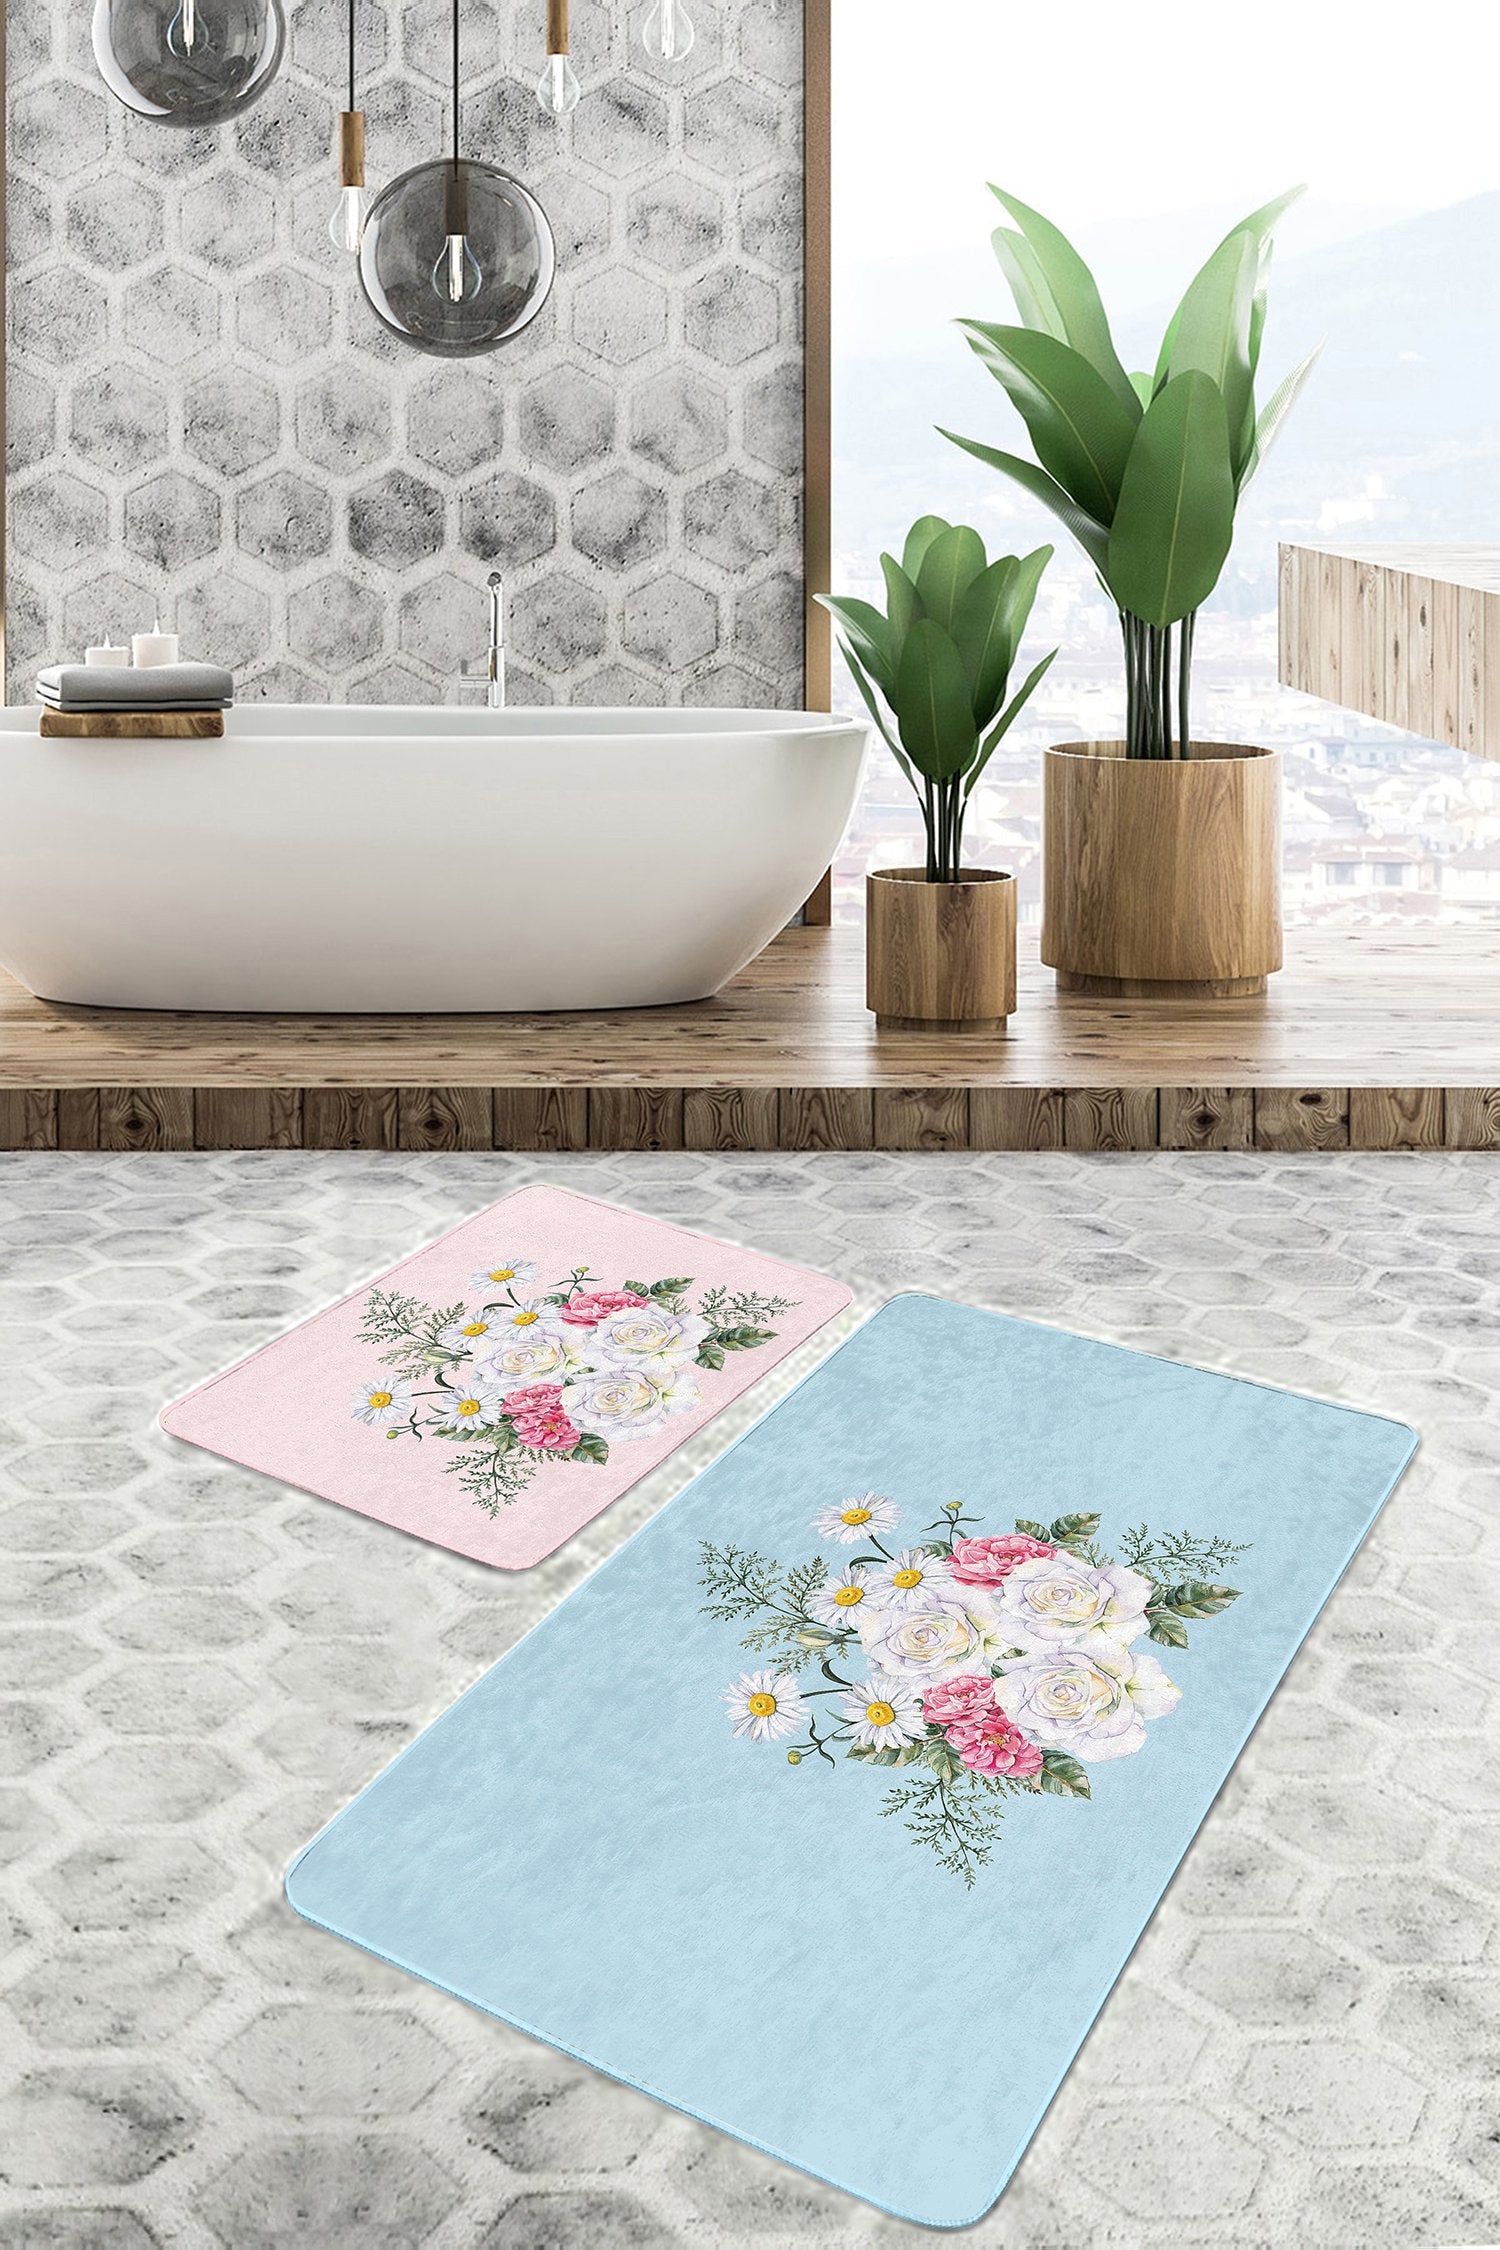 Close-up of the Charming Butterfly on Flowers Patterns on the Bath Mat